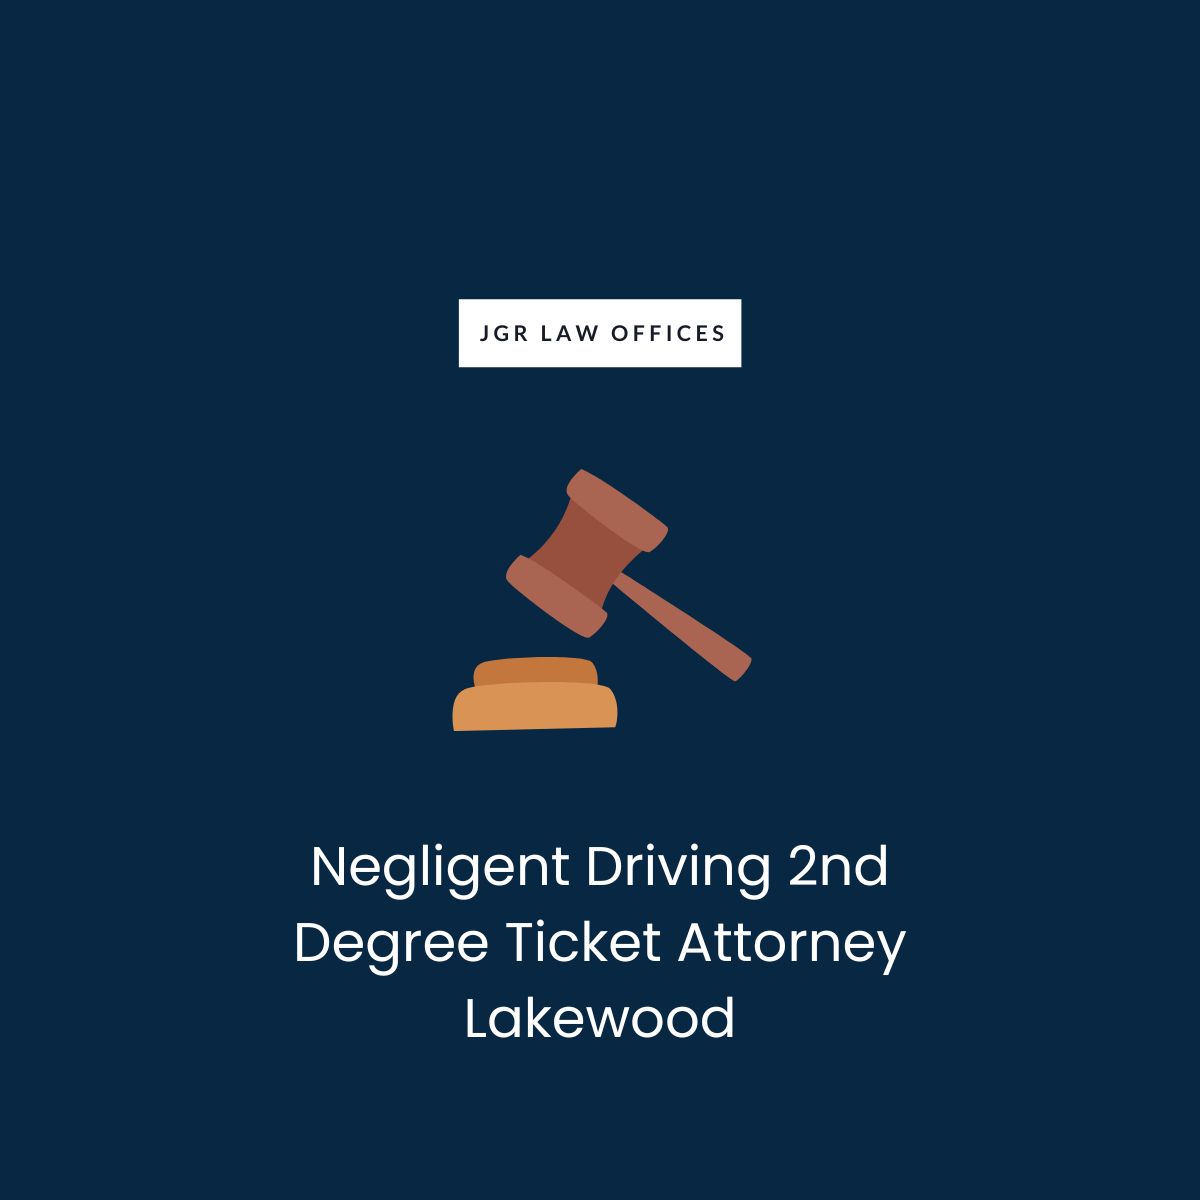 Negligent Driving 2nd Degree Ticket Attorney Lakewood